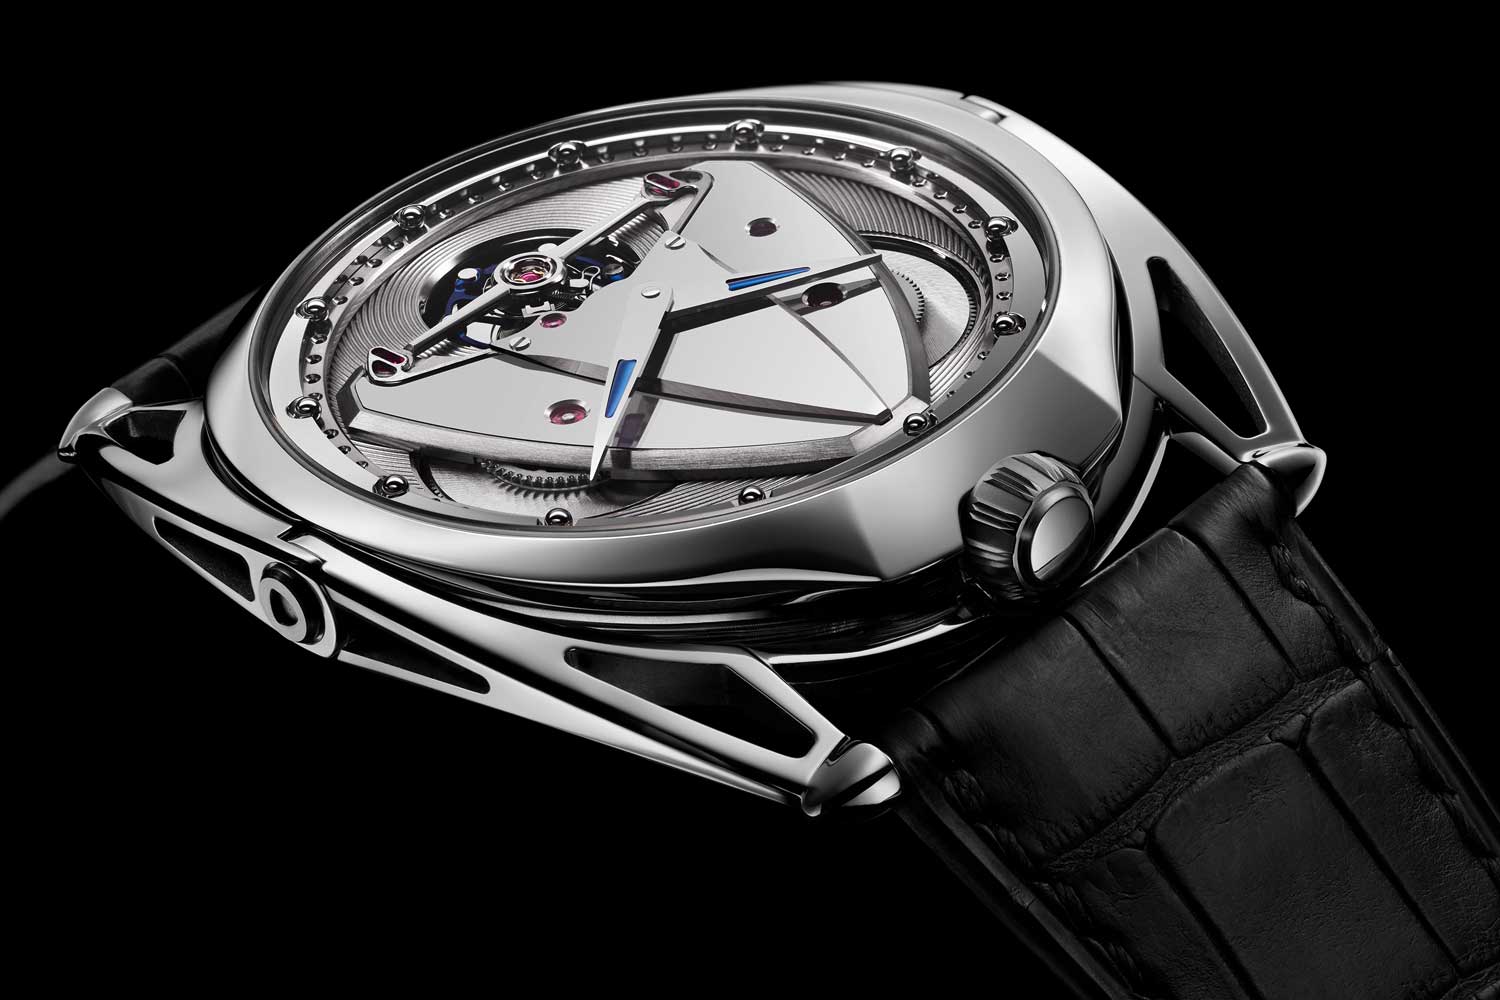 To celebrate the 10th anniversary of the DB28 last year, DeBethune introduced the DB28XP which is considerably thinner at 7.3mm versus the 9.2mm models